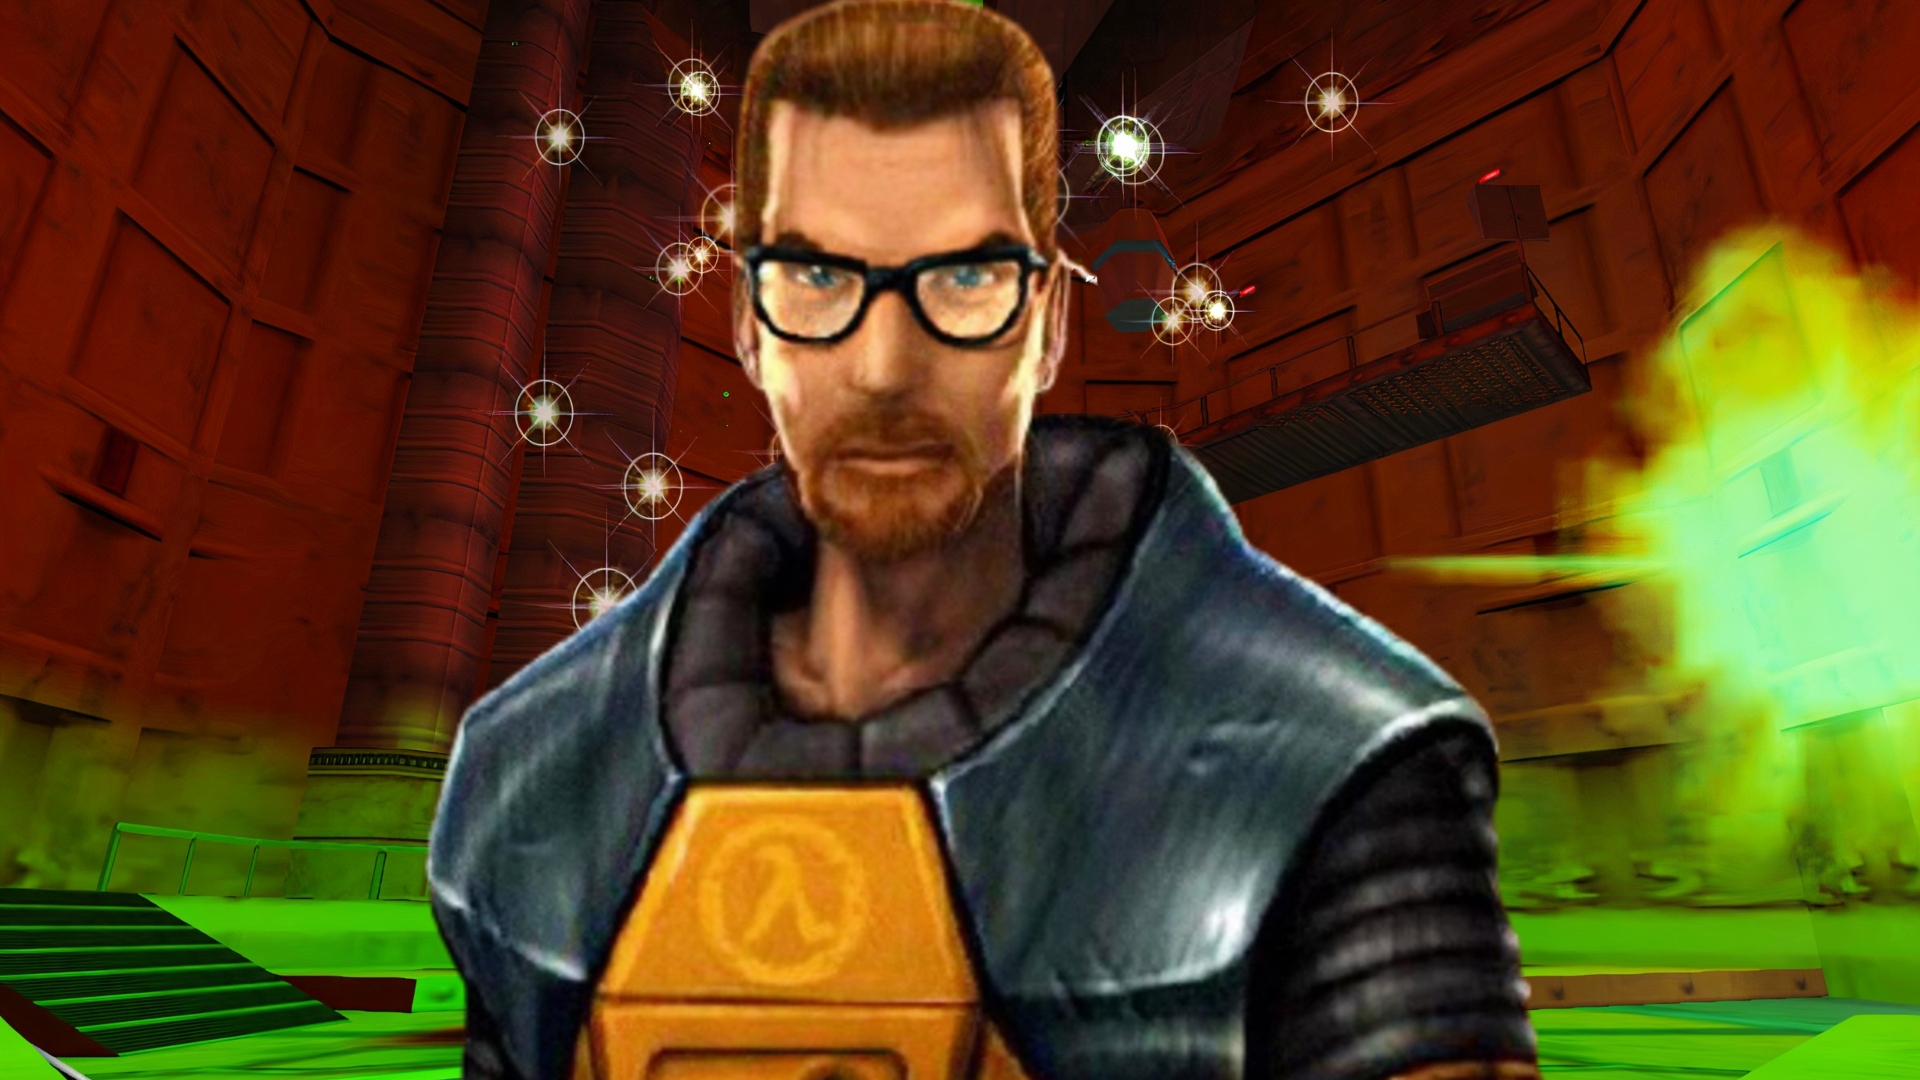 Half-Life remade as a roguelike, approved by Valve, and playable now